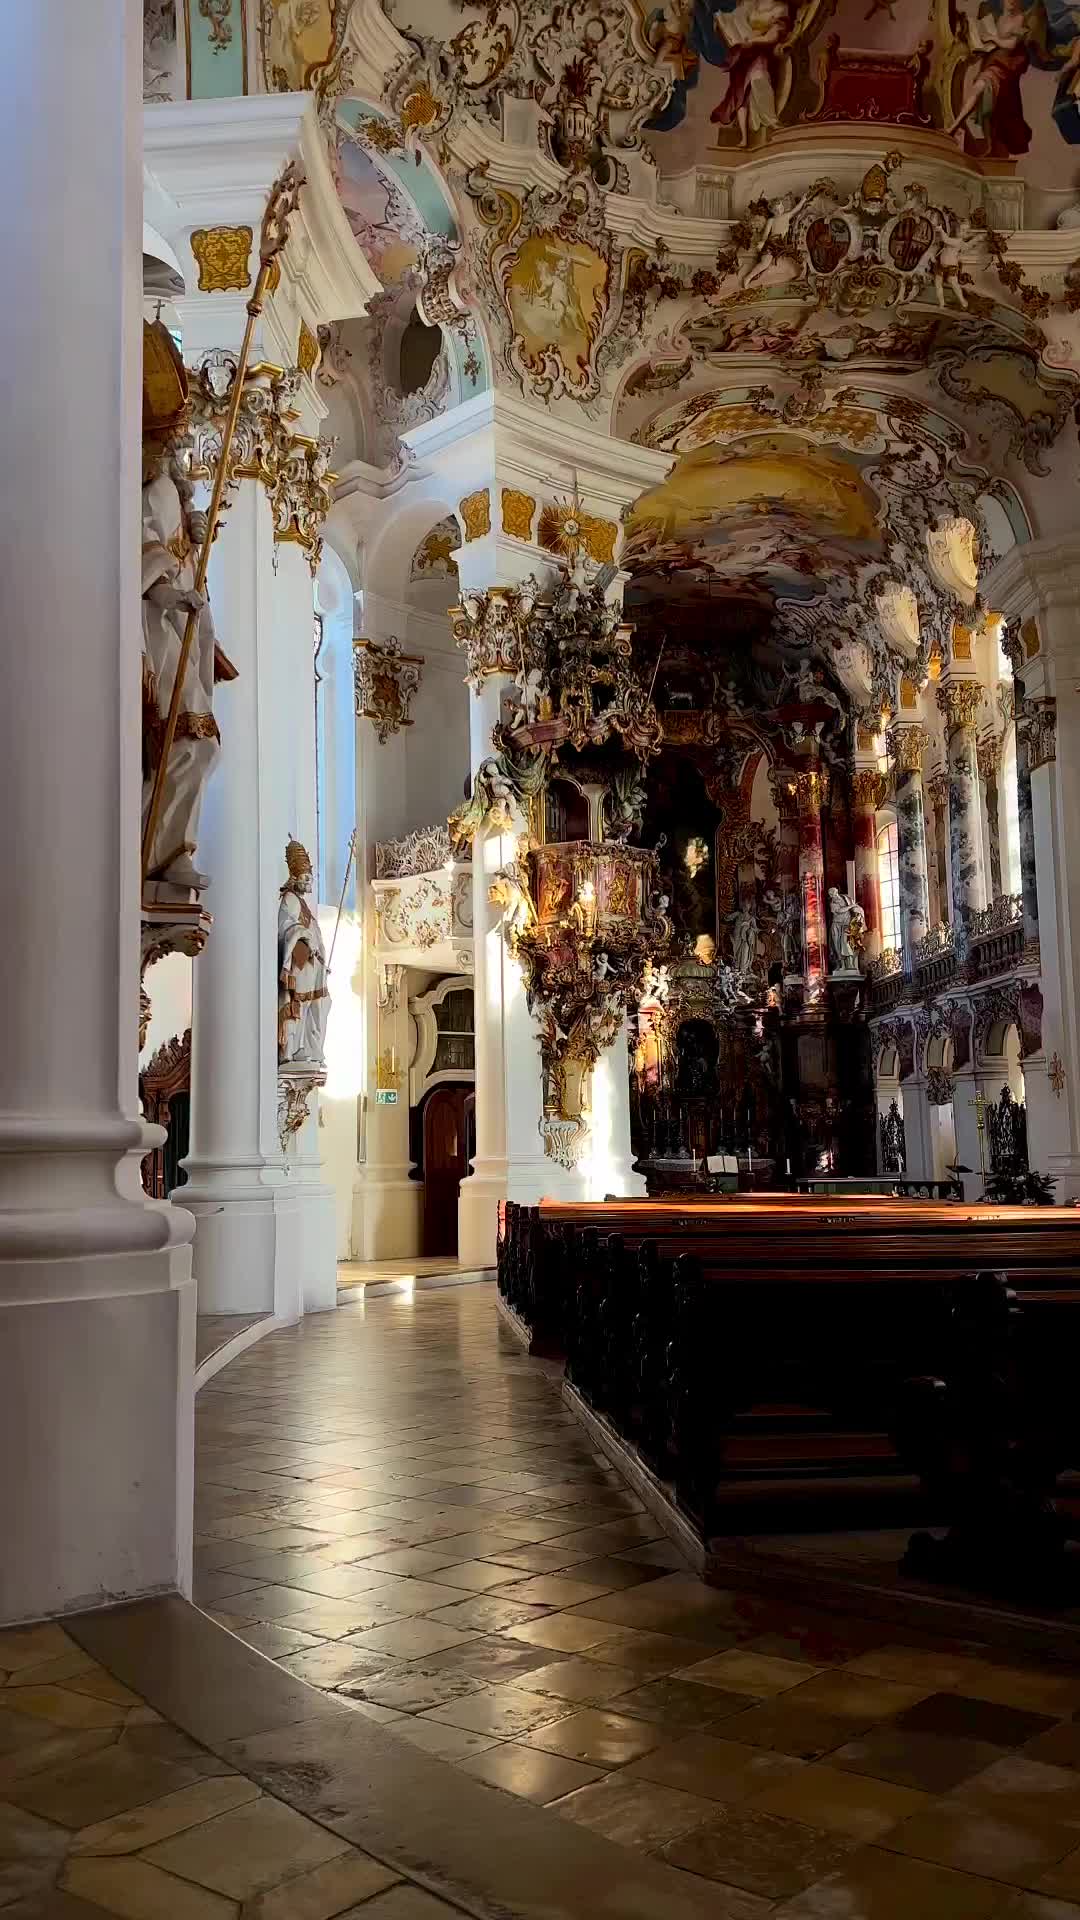 AI or Real? Discover Wieskirche's Stunning Rococo Design